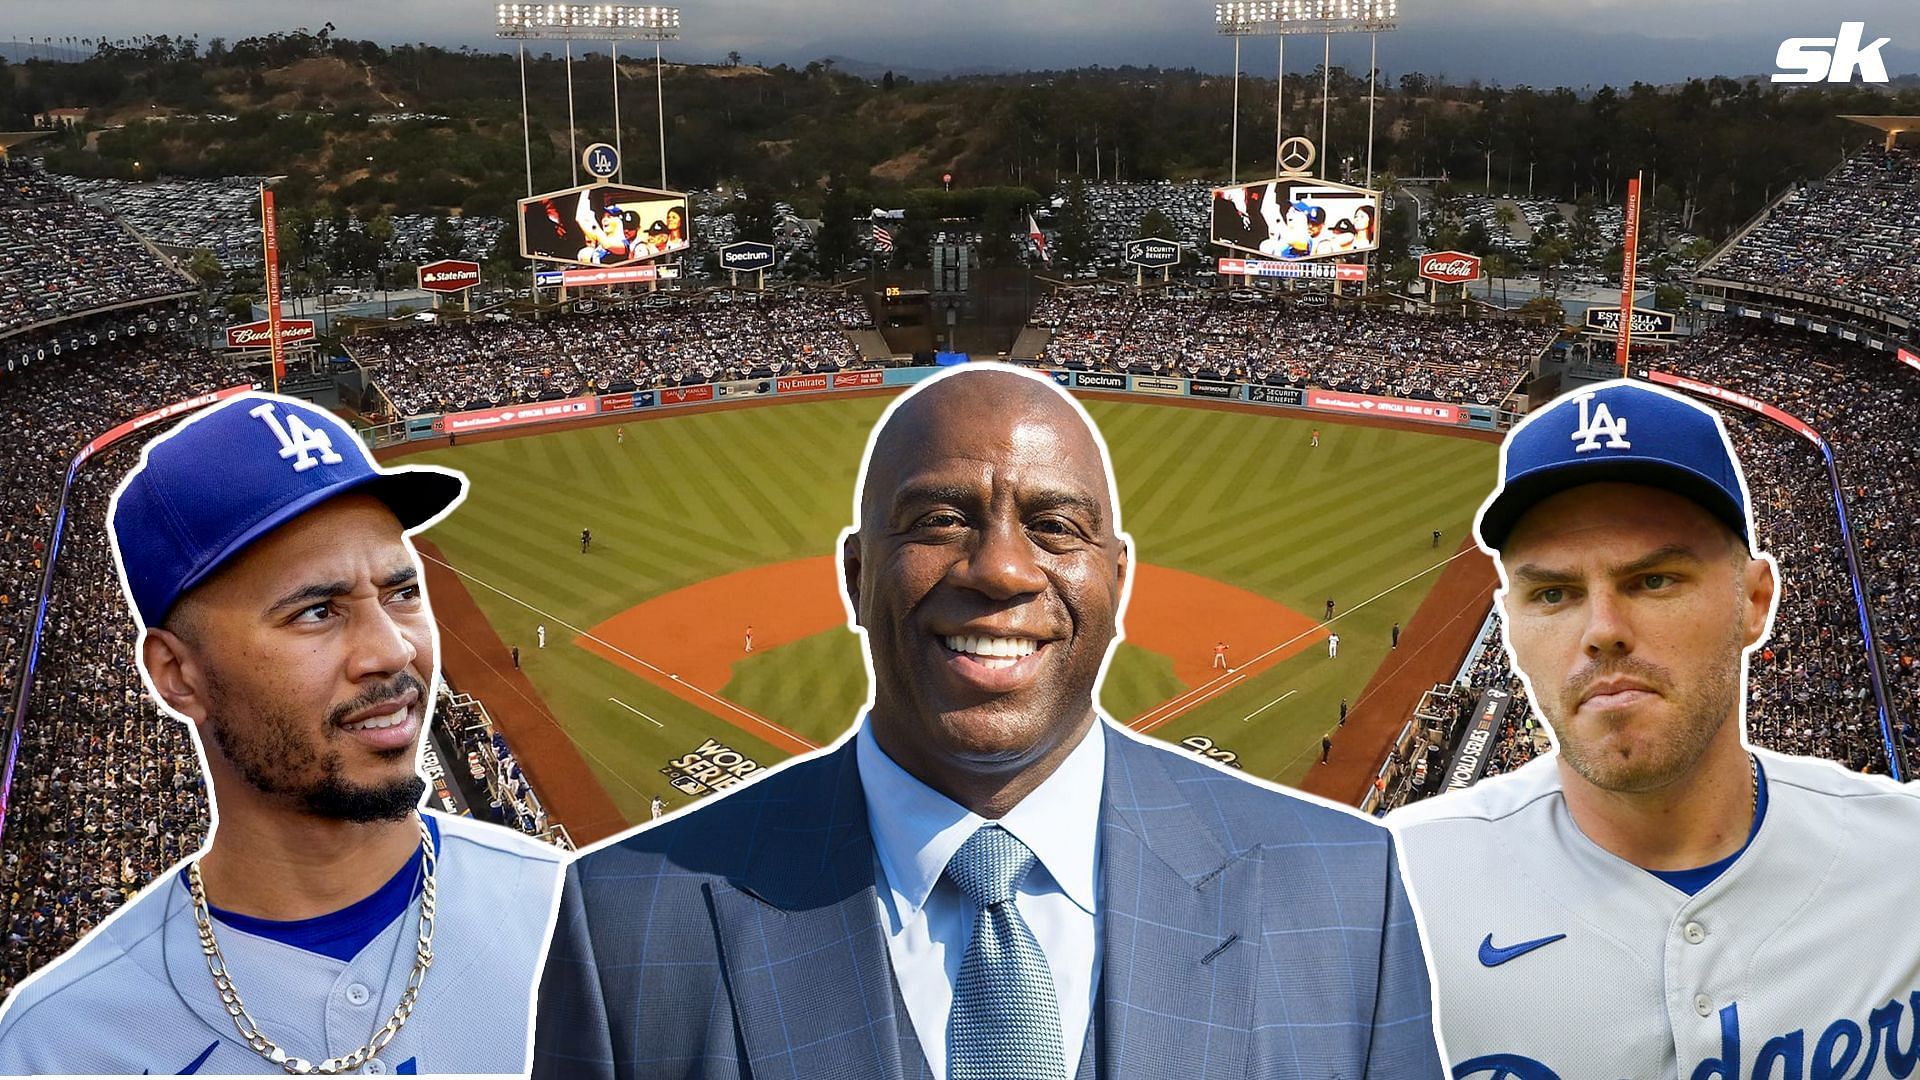 NBA legend Magic Johnson shares disappointment over Dodgers&rsquo; embarrassing NLDS exit: &quot;[We] didn&rsquo;t hit or pitch well&quot;